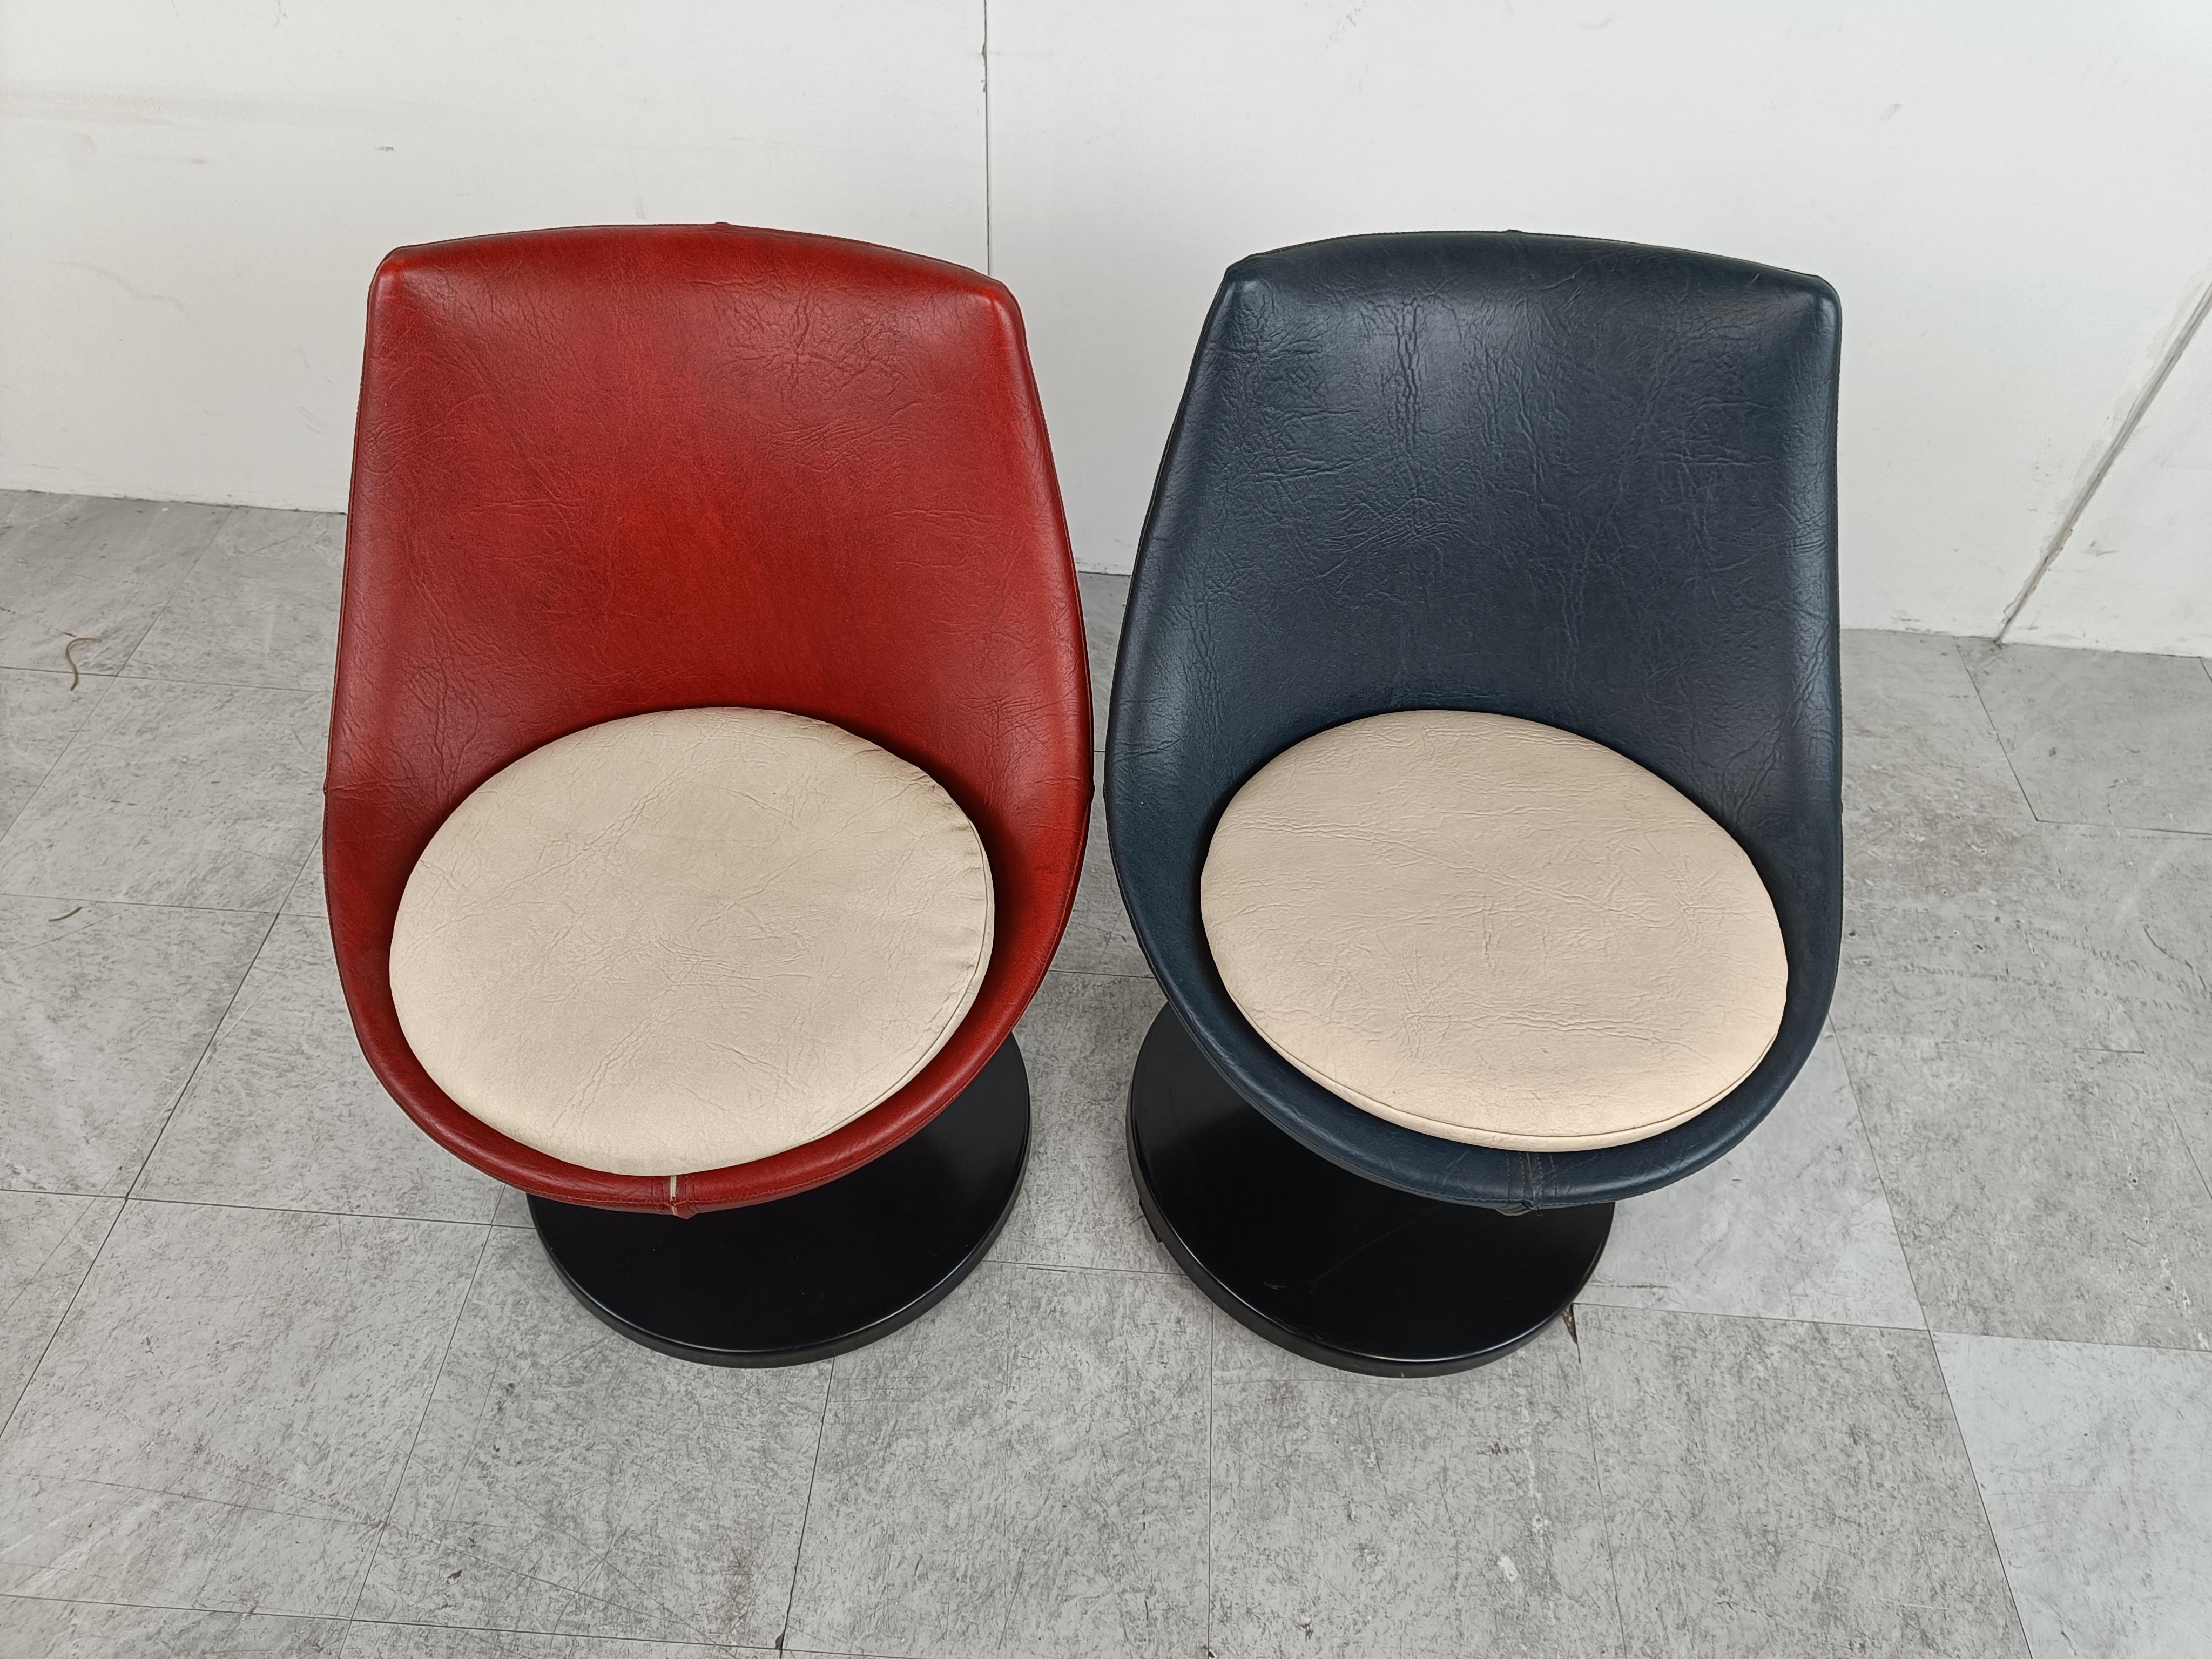 Pair of Polaris Chairs by Pierre Guariche for Meurop, 1960s For Sale 3